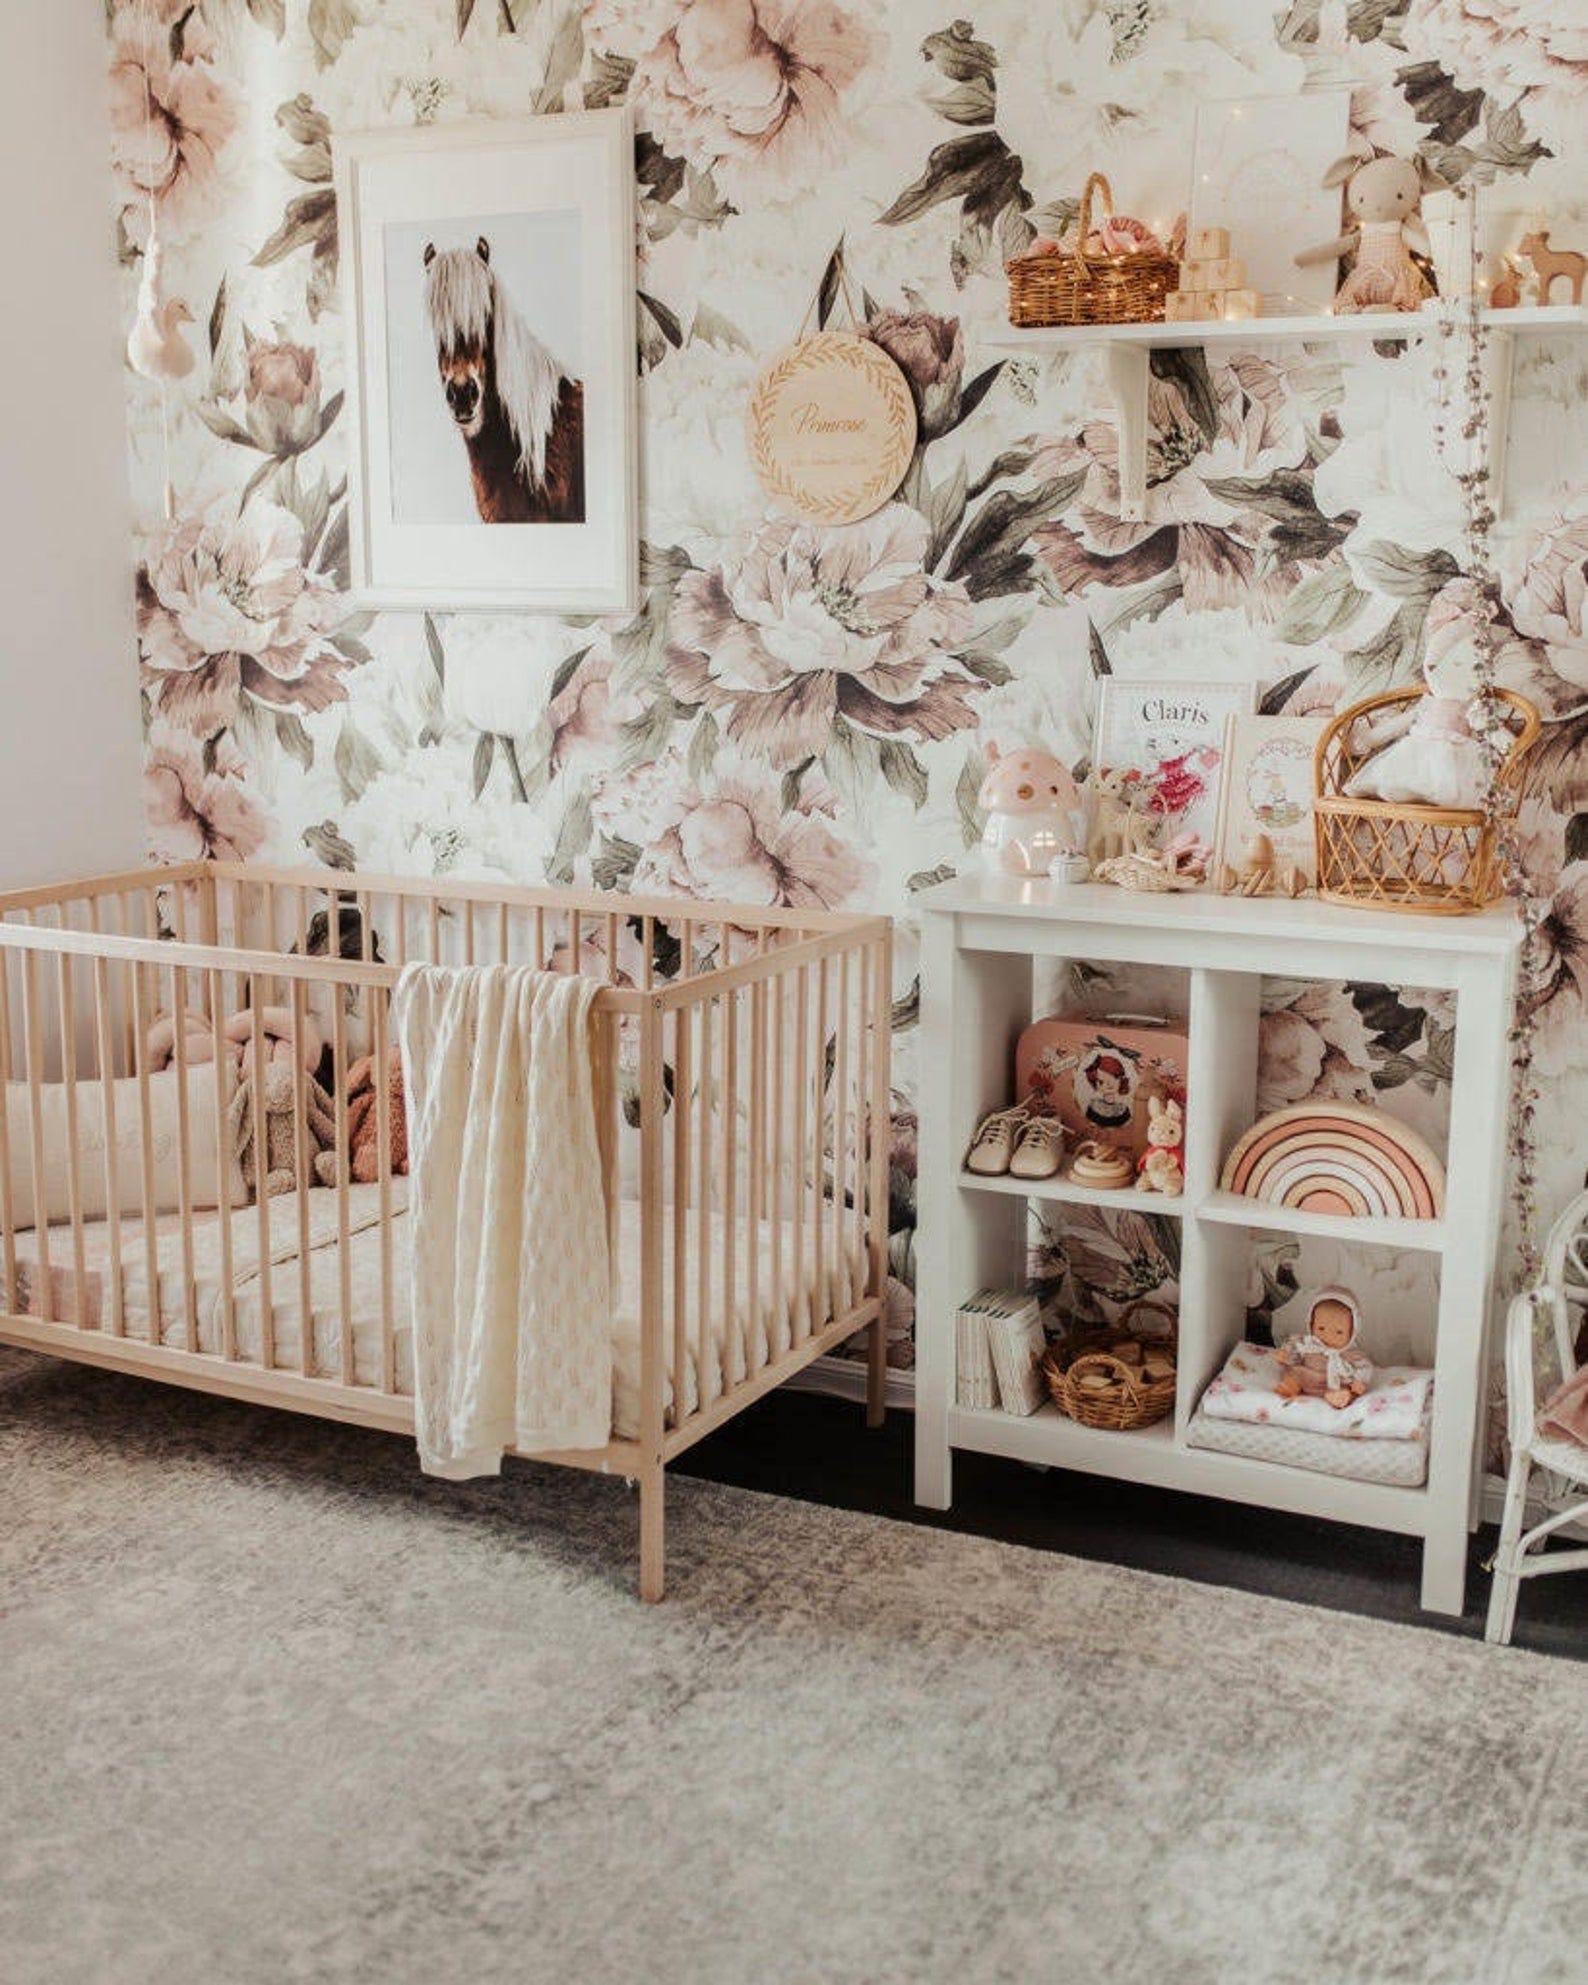 Latest Nursery Trends Of 2020 For Your Little One | by Maya Cytron ...